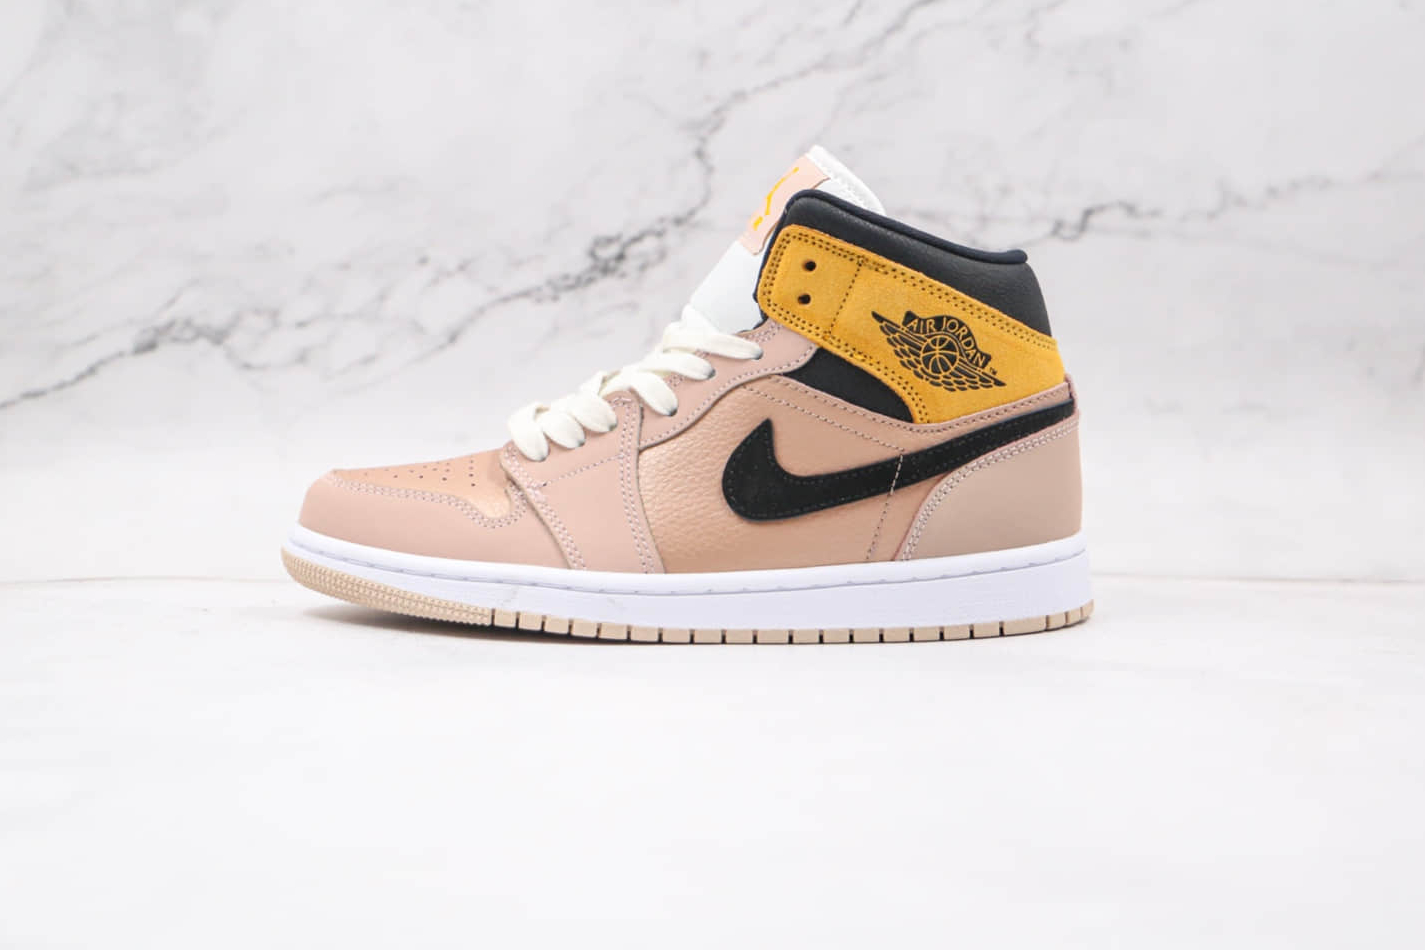 Air Jordan 1 Mid SE 'Particle Beige' DD2224-200: Stylish and Premium Sneakers for a Trendy Look